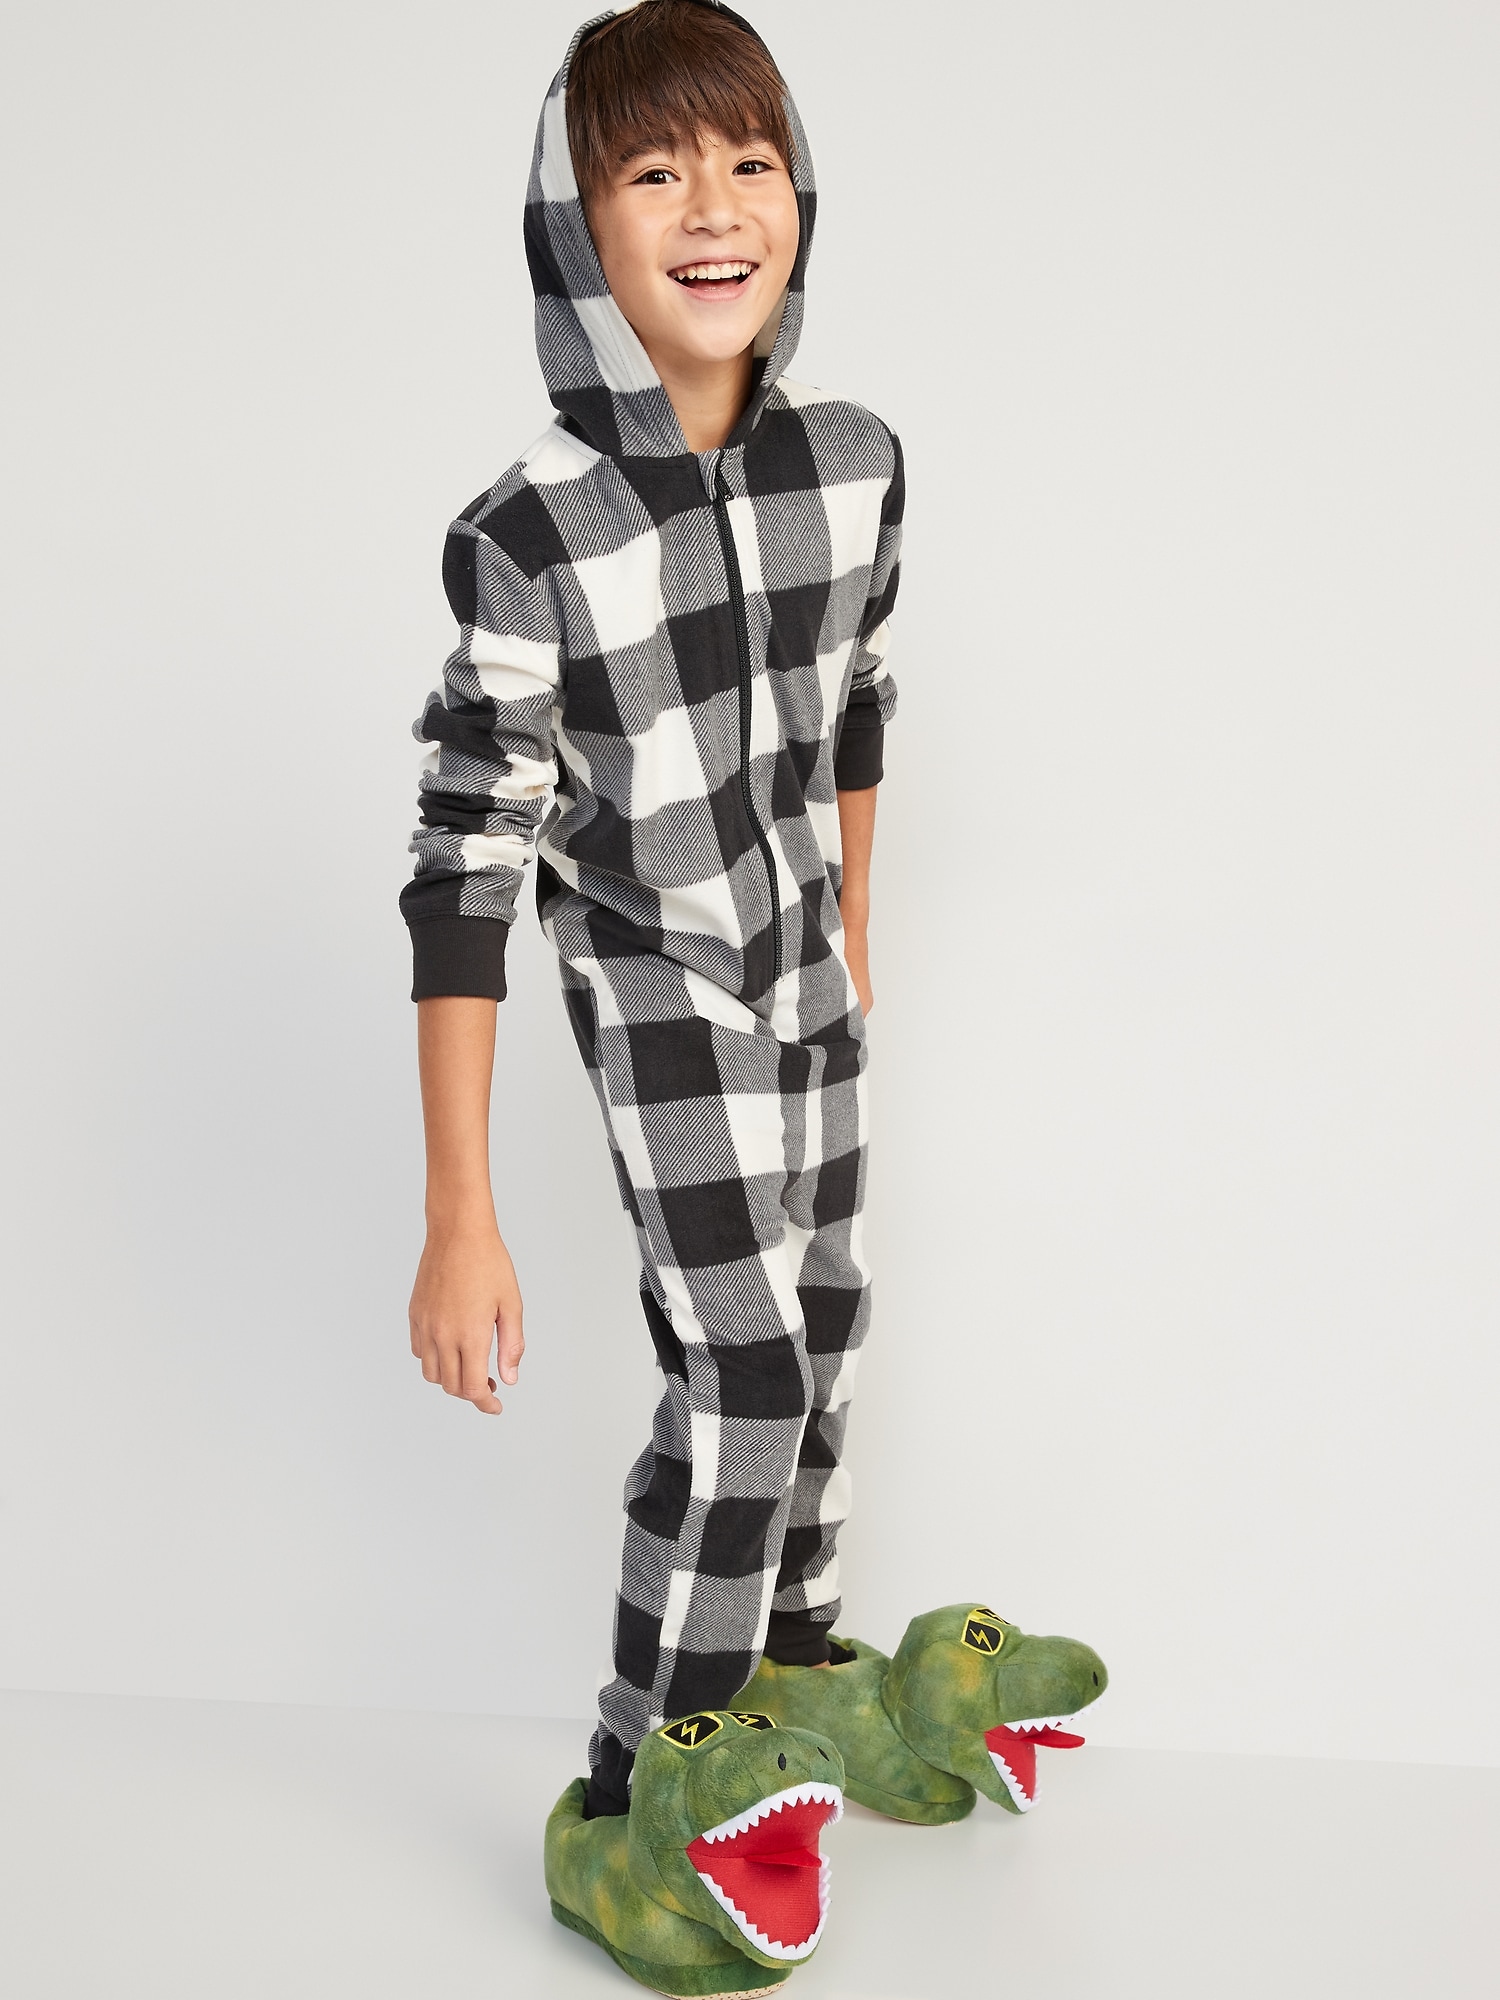 Oldnavy Gender-Neutral Matching Microfleece Hooded One-Piece Pajamas for Kids